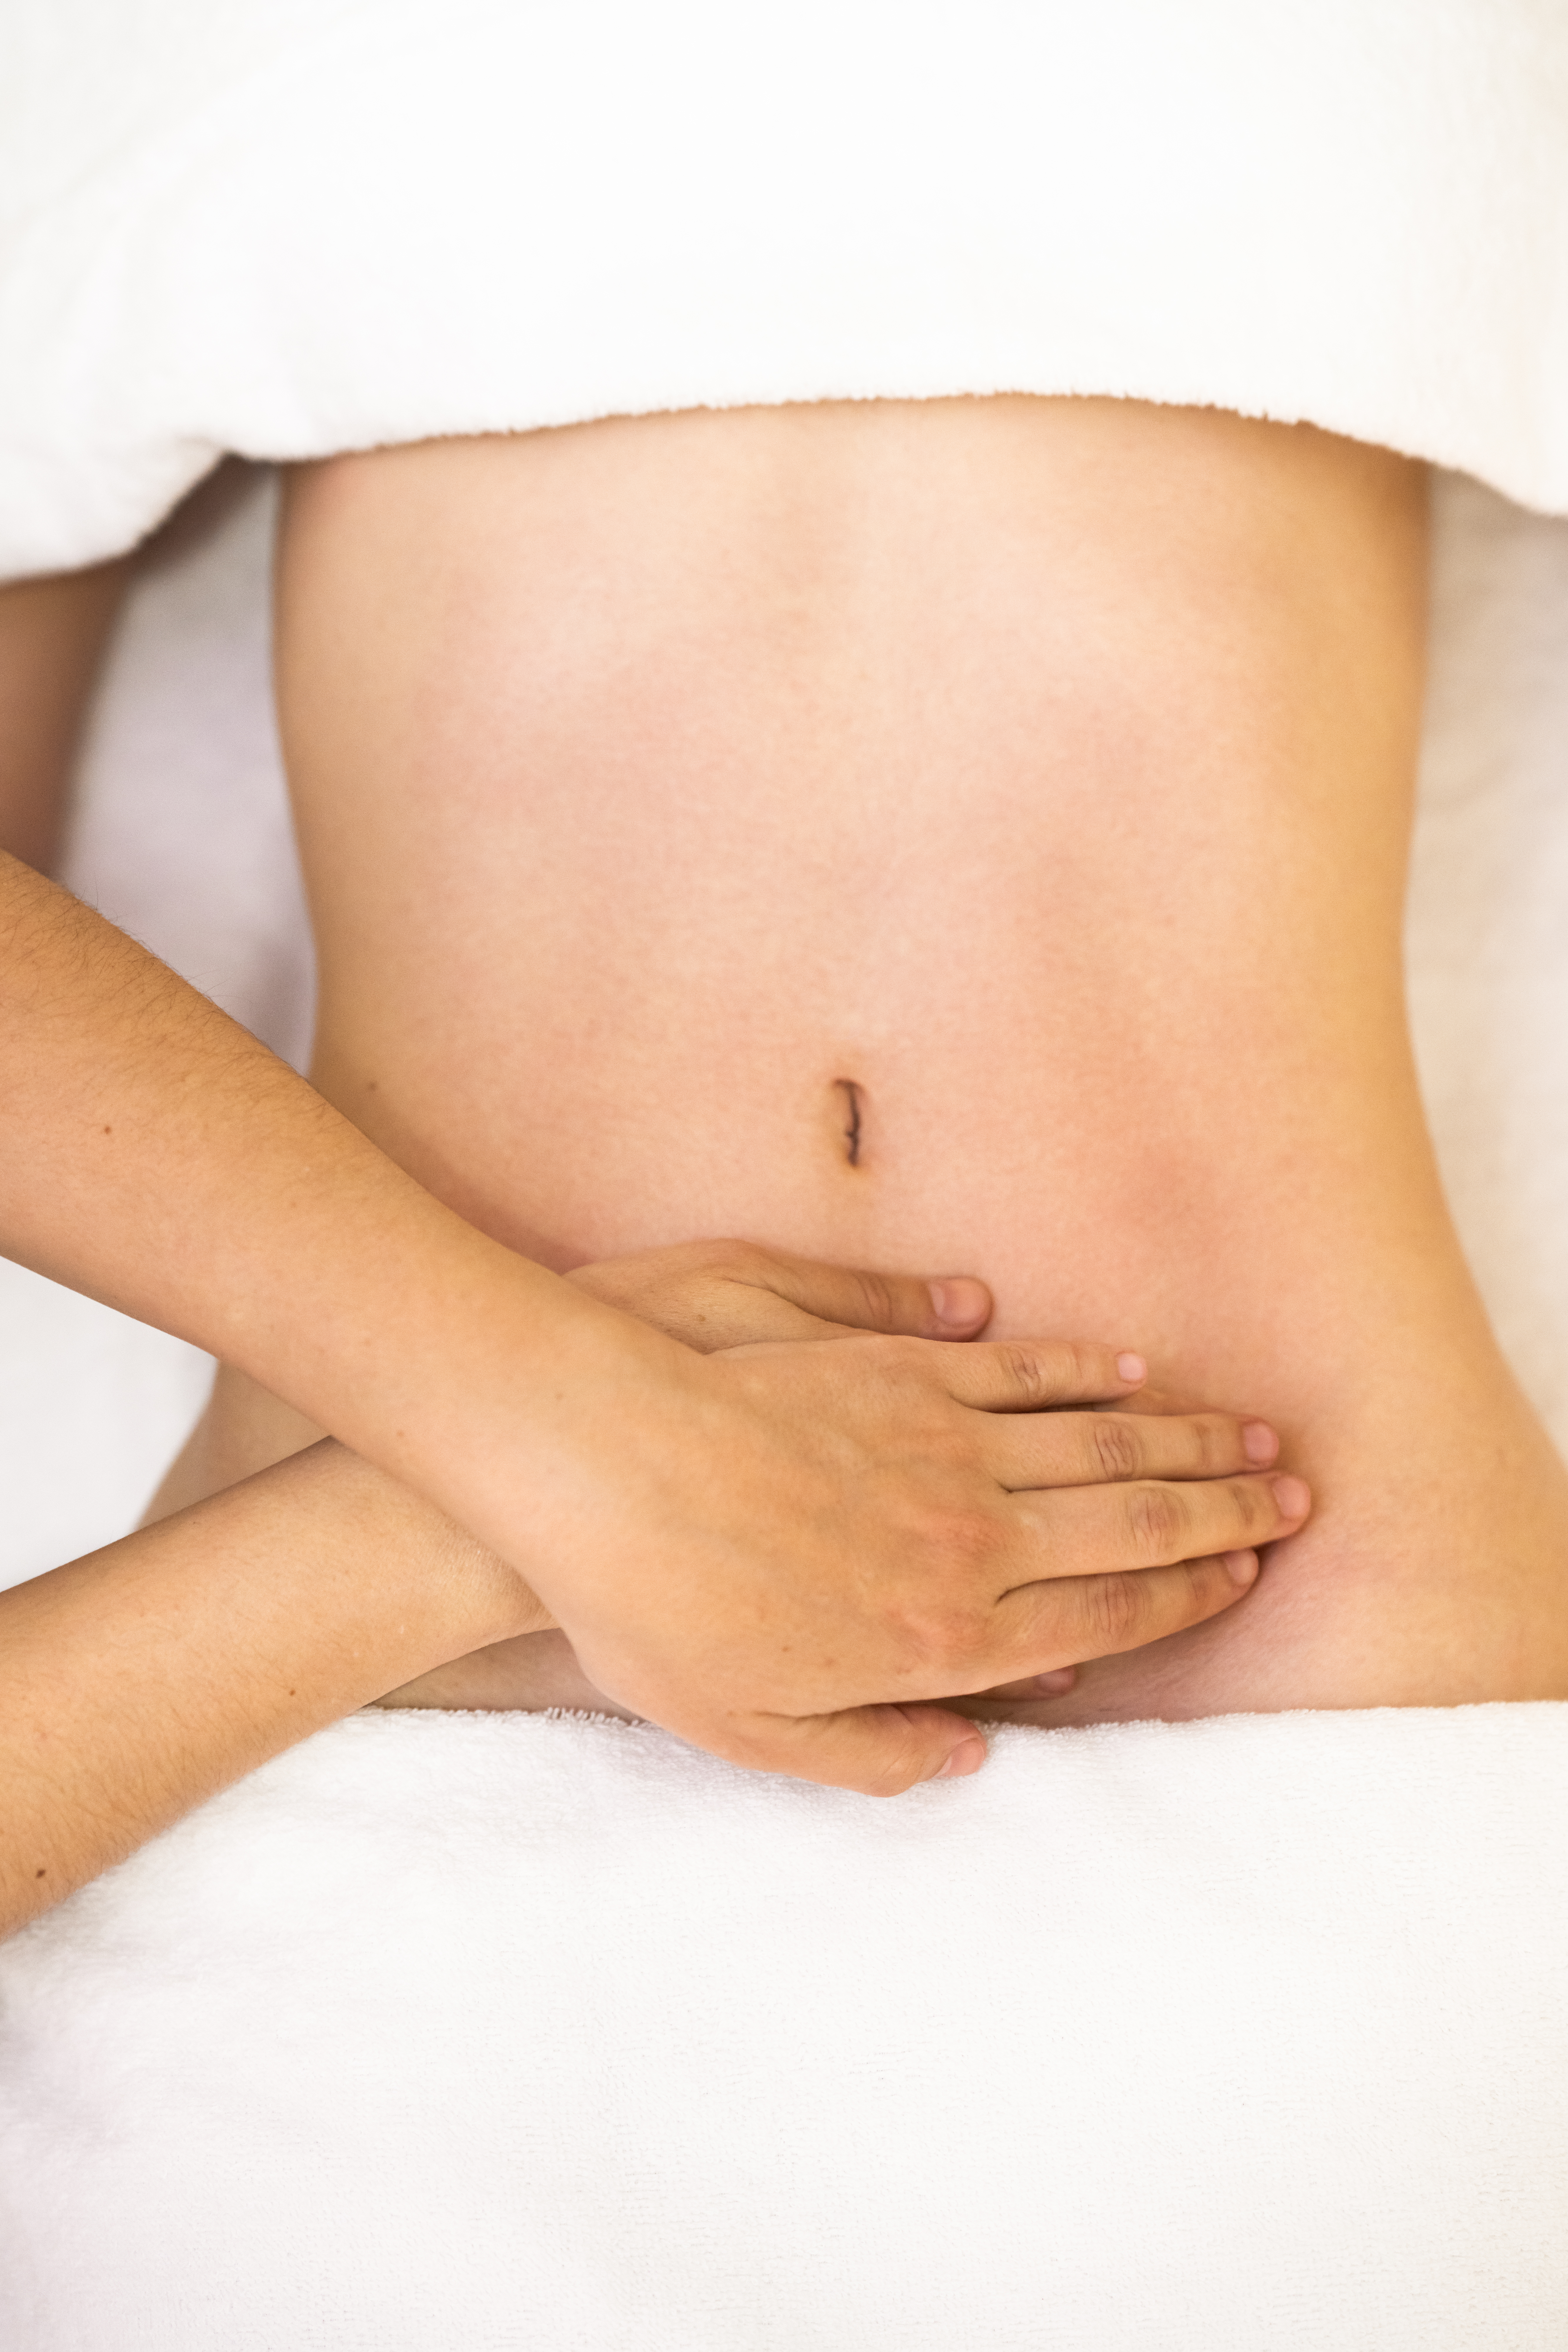 The Importance of Post-Op Care with Lymphatic Drainage